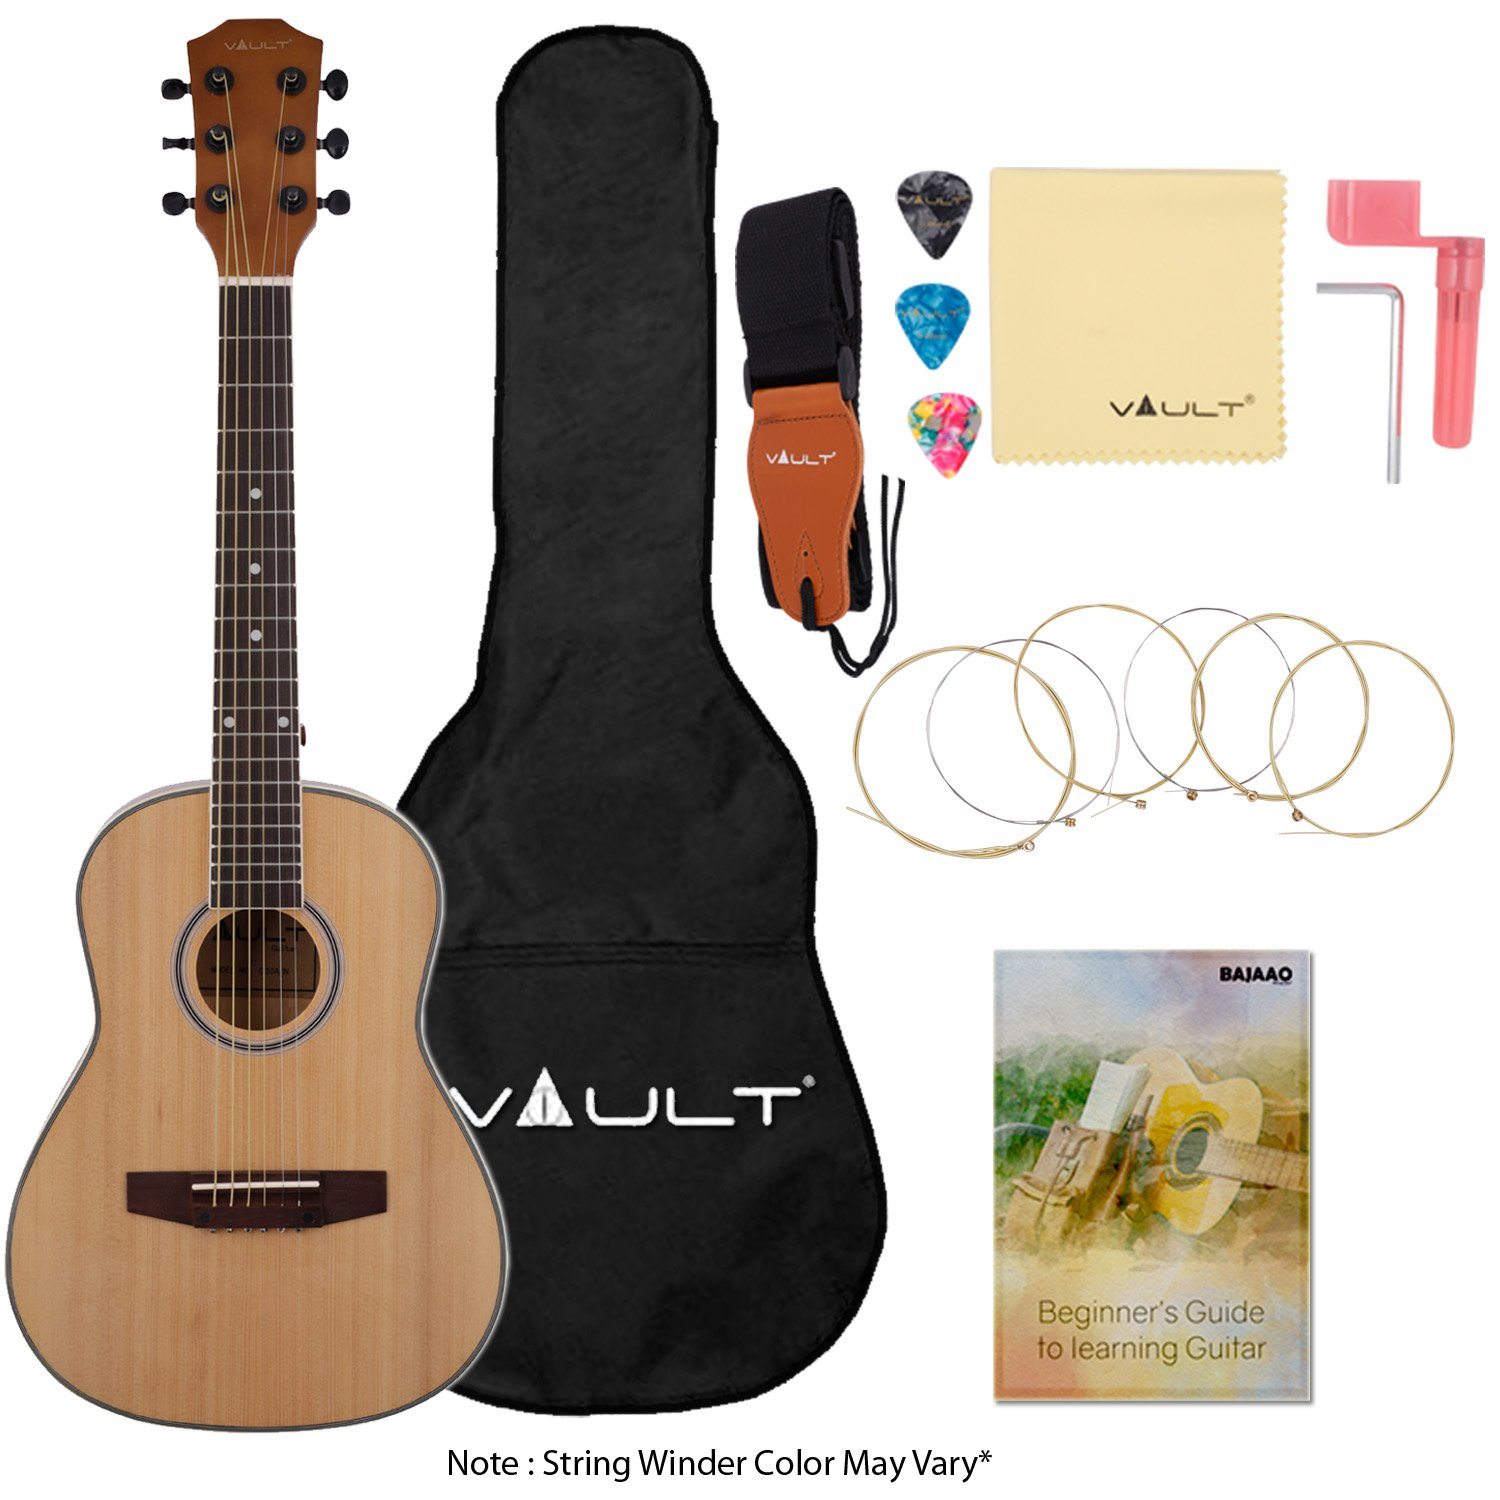 Image of Vault Junior 1/2 Size Acoustic Guitar for Kids With Gig bag, Strings, Polishing Cloth, String Winder and Picks - Natural Gloss